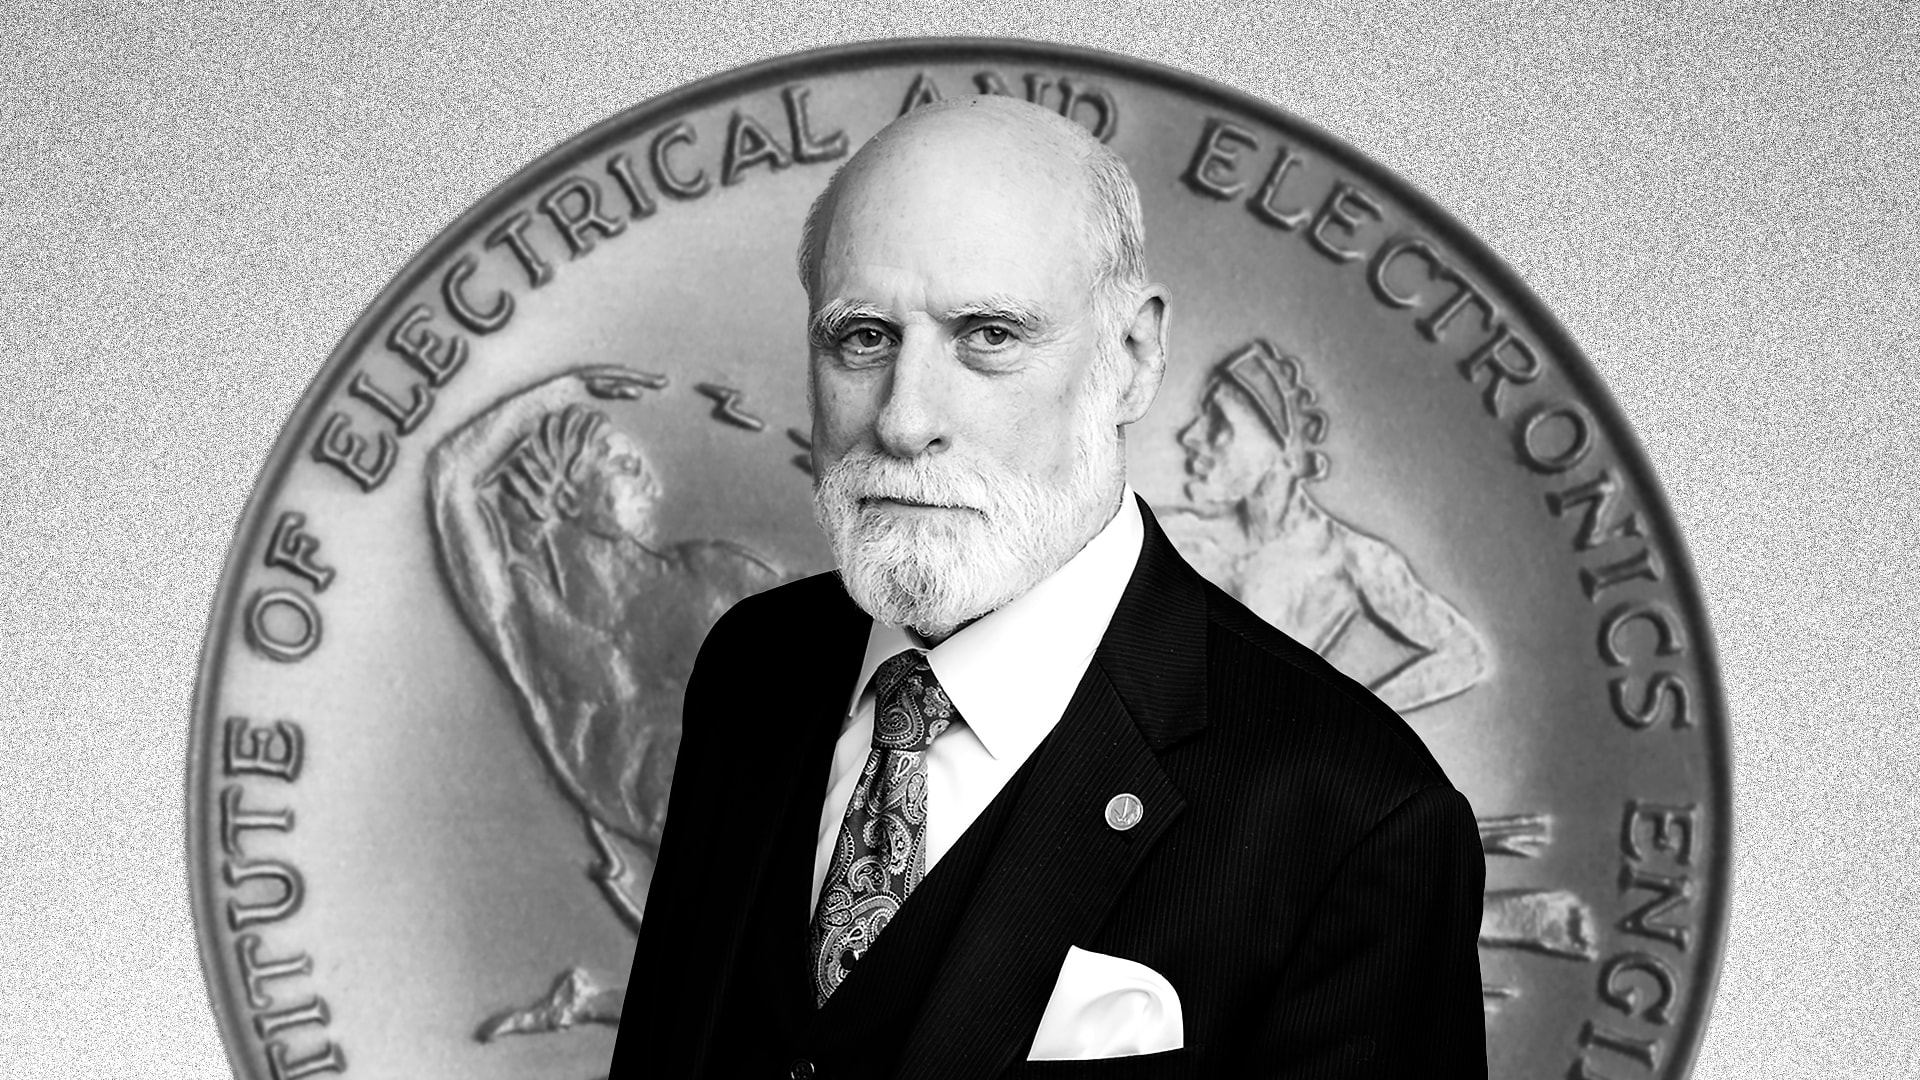 Internet pioneer Vint Cerf: As AI becomes part of online life, we must embrace truth and accountability